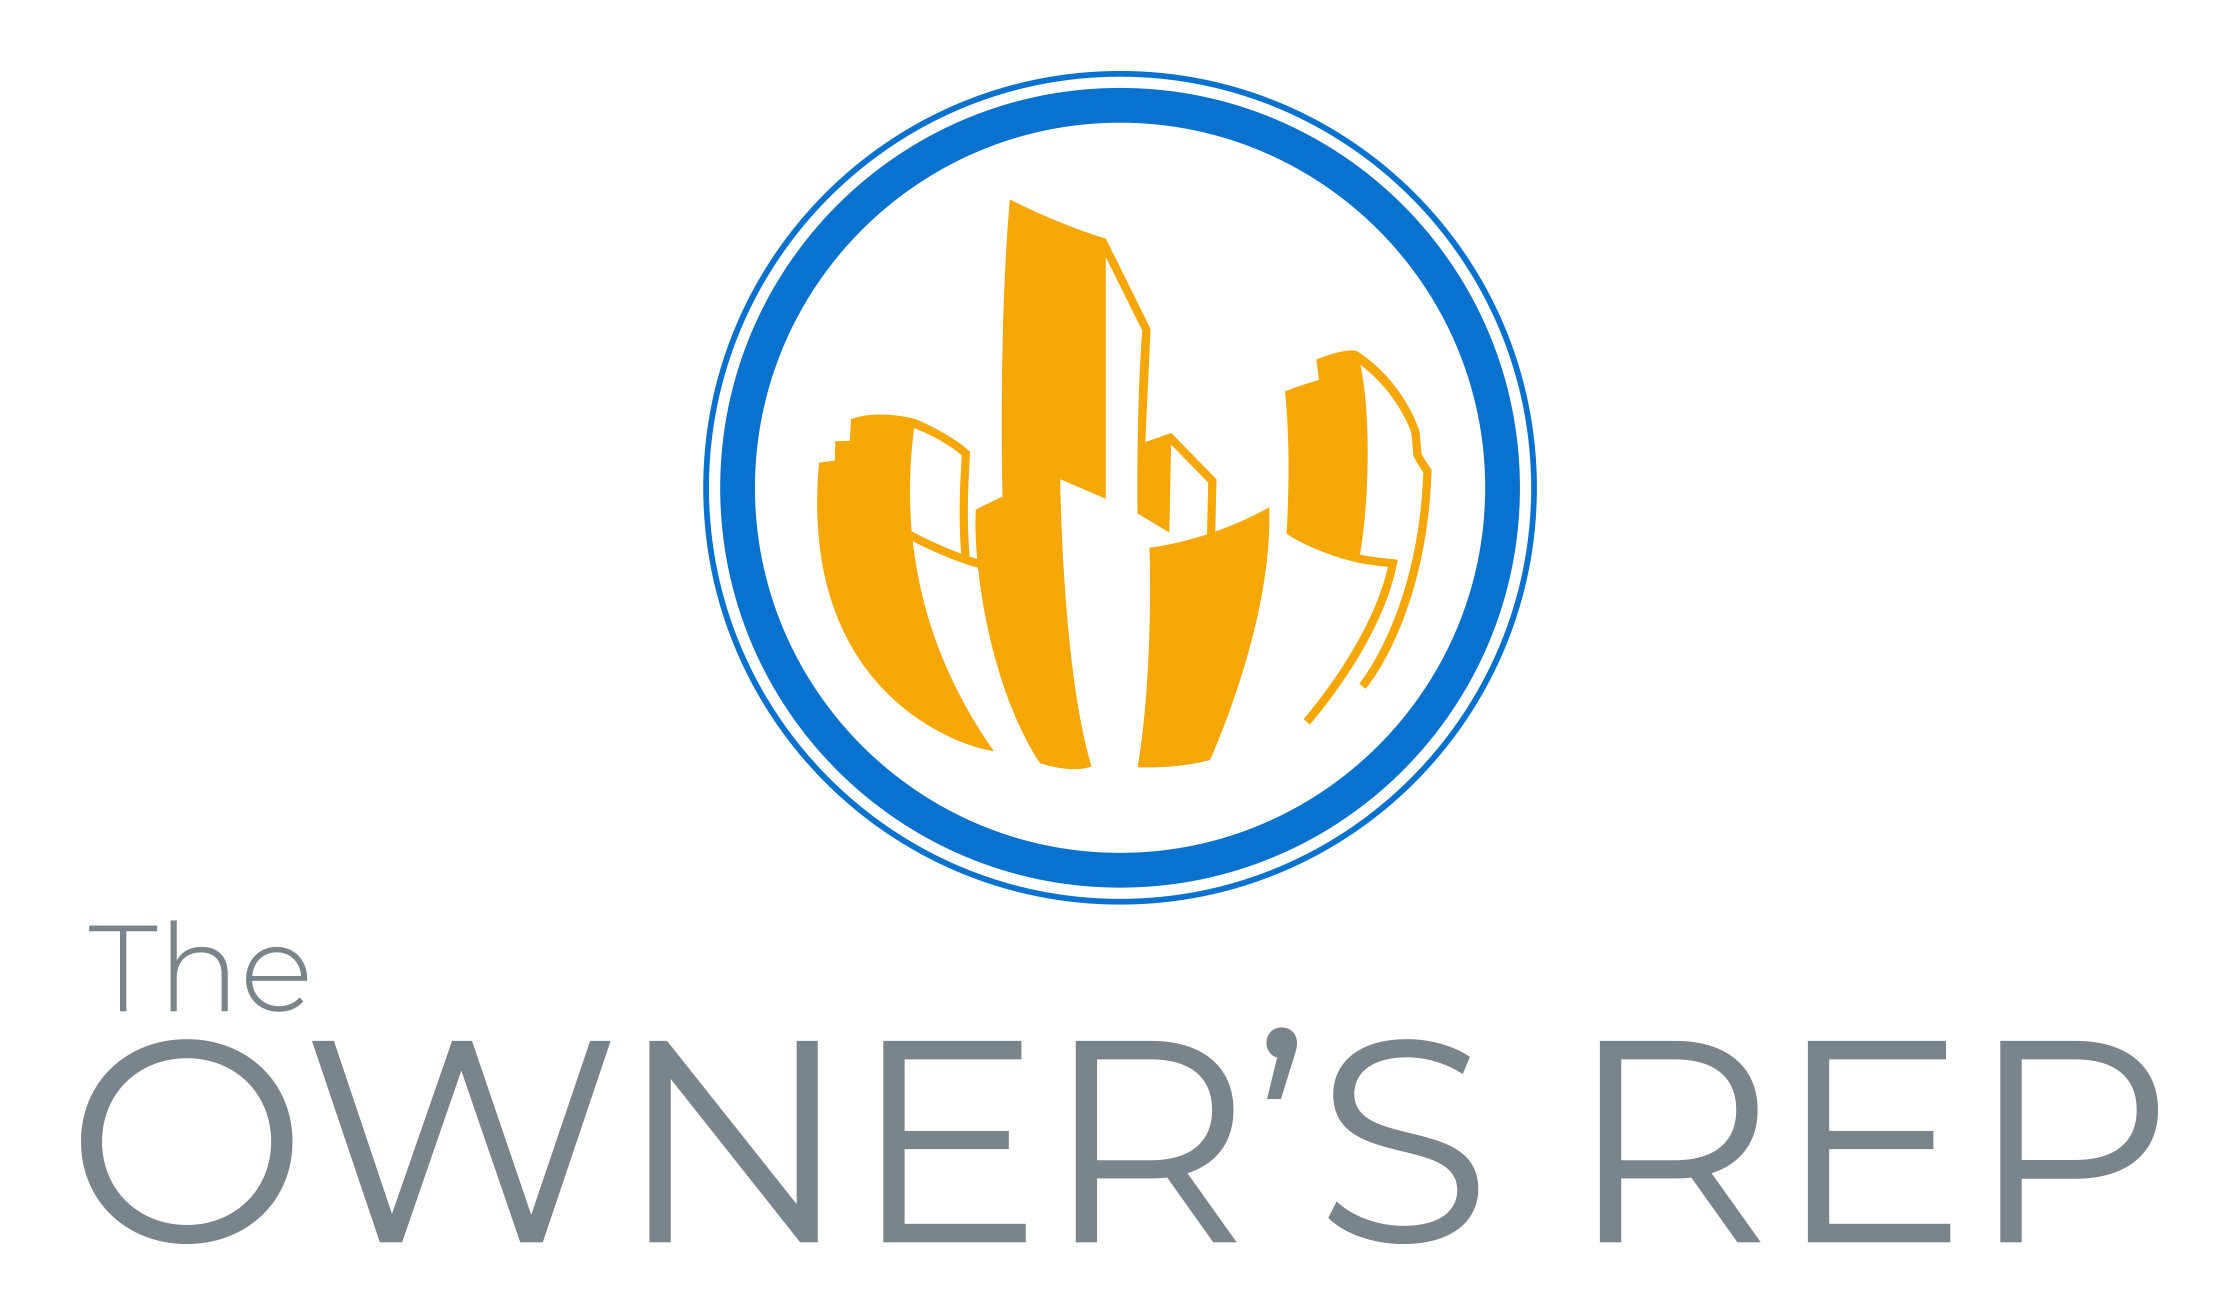 The Owner's Rep, LLC